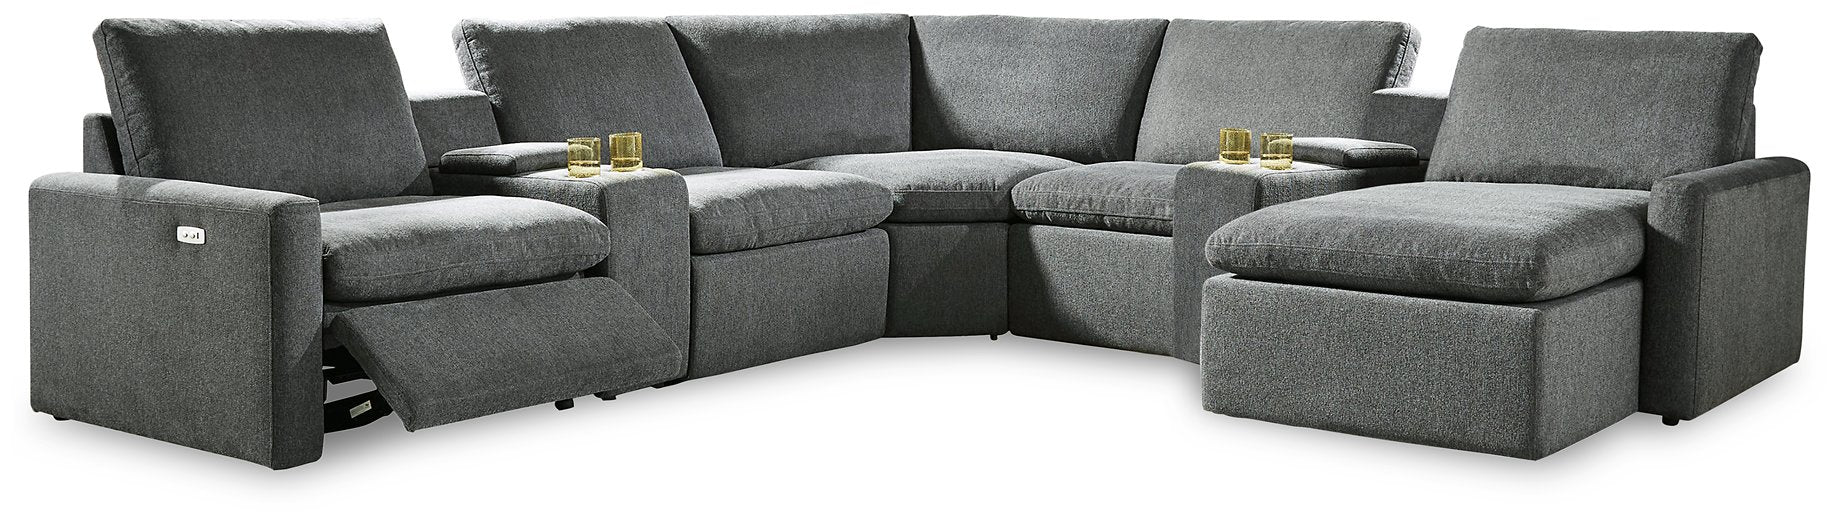 Hartsdale Power Reclining Sectional with Chaise - The Warehouse Mattresses, Furniture, & More (West Jordan,UT)